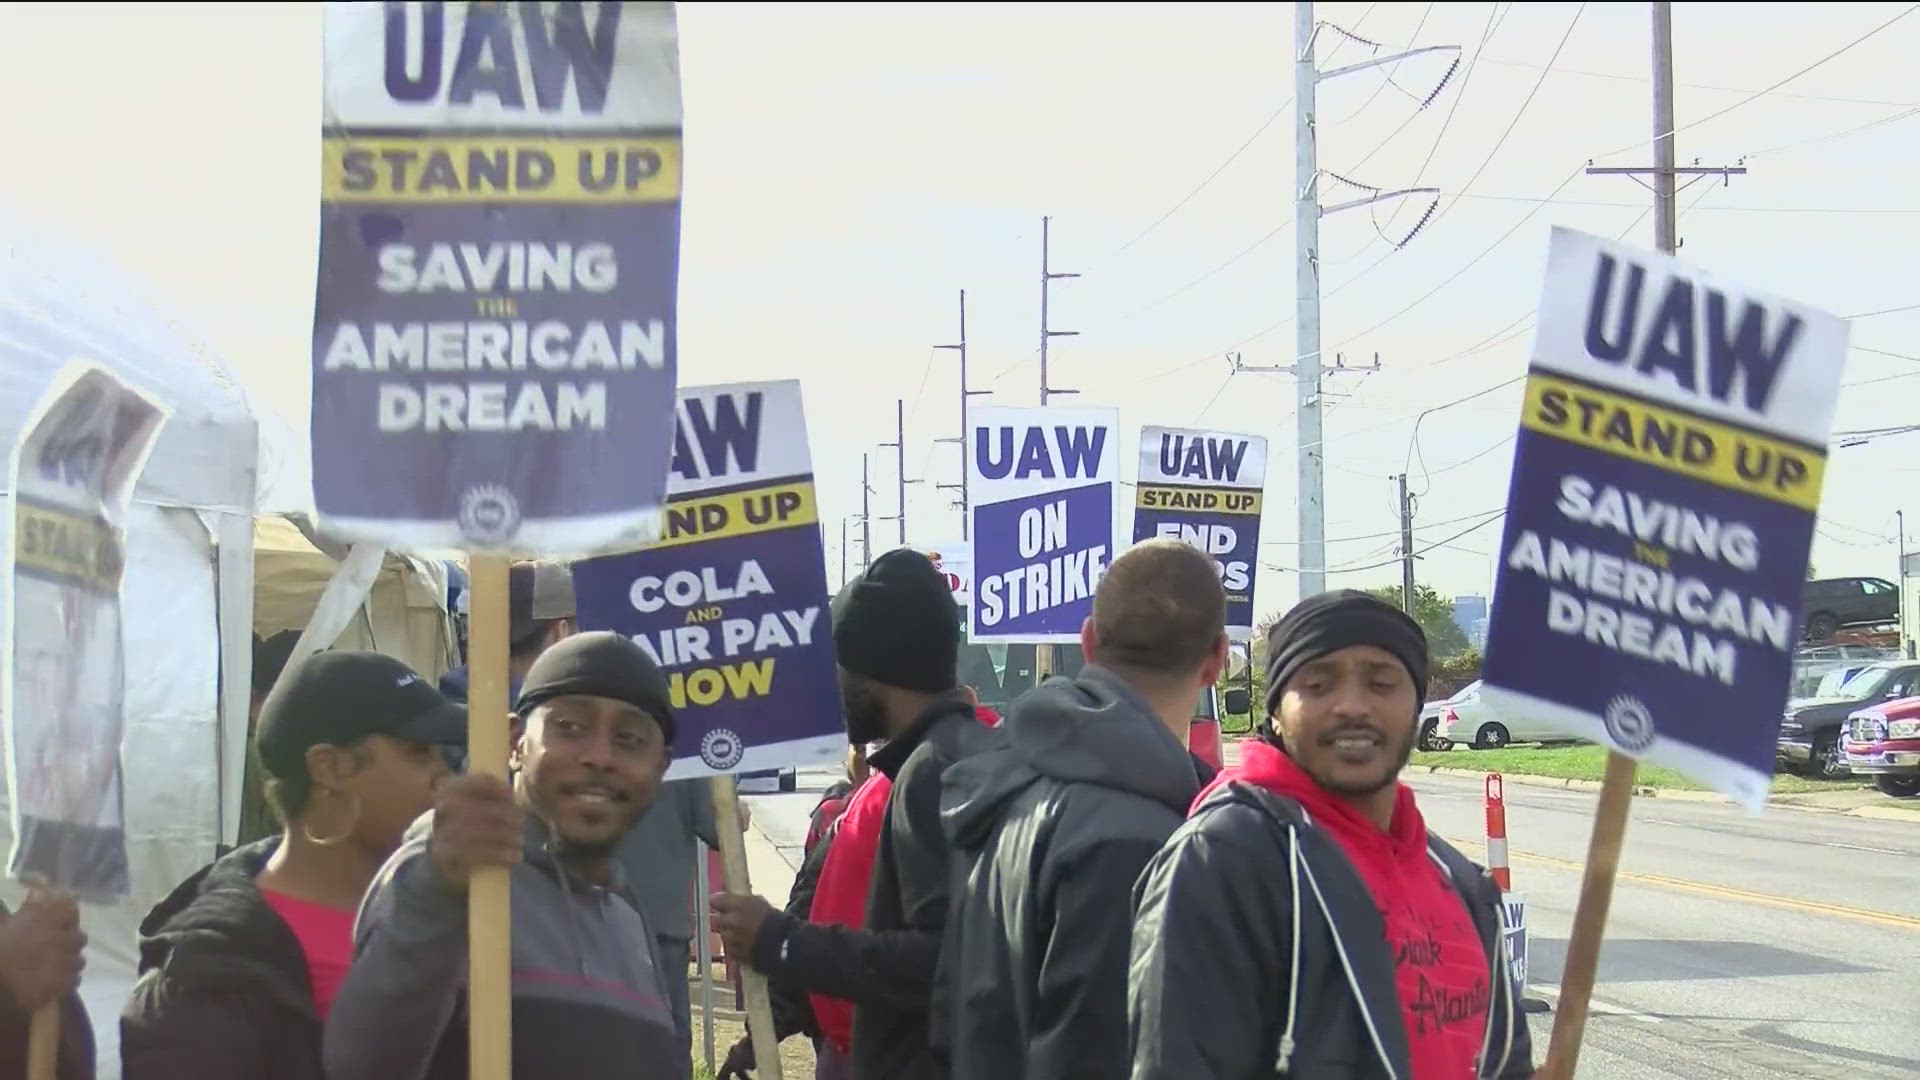 Strikers said the tentative agreement that Ford made with the UAW shows progress in the weeks of negotiations with the Big 3.